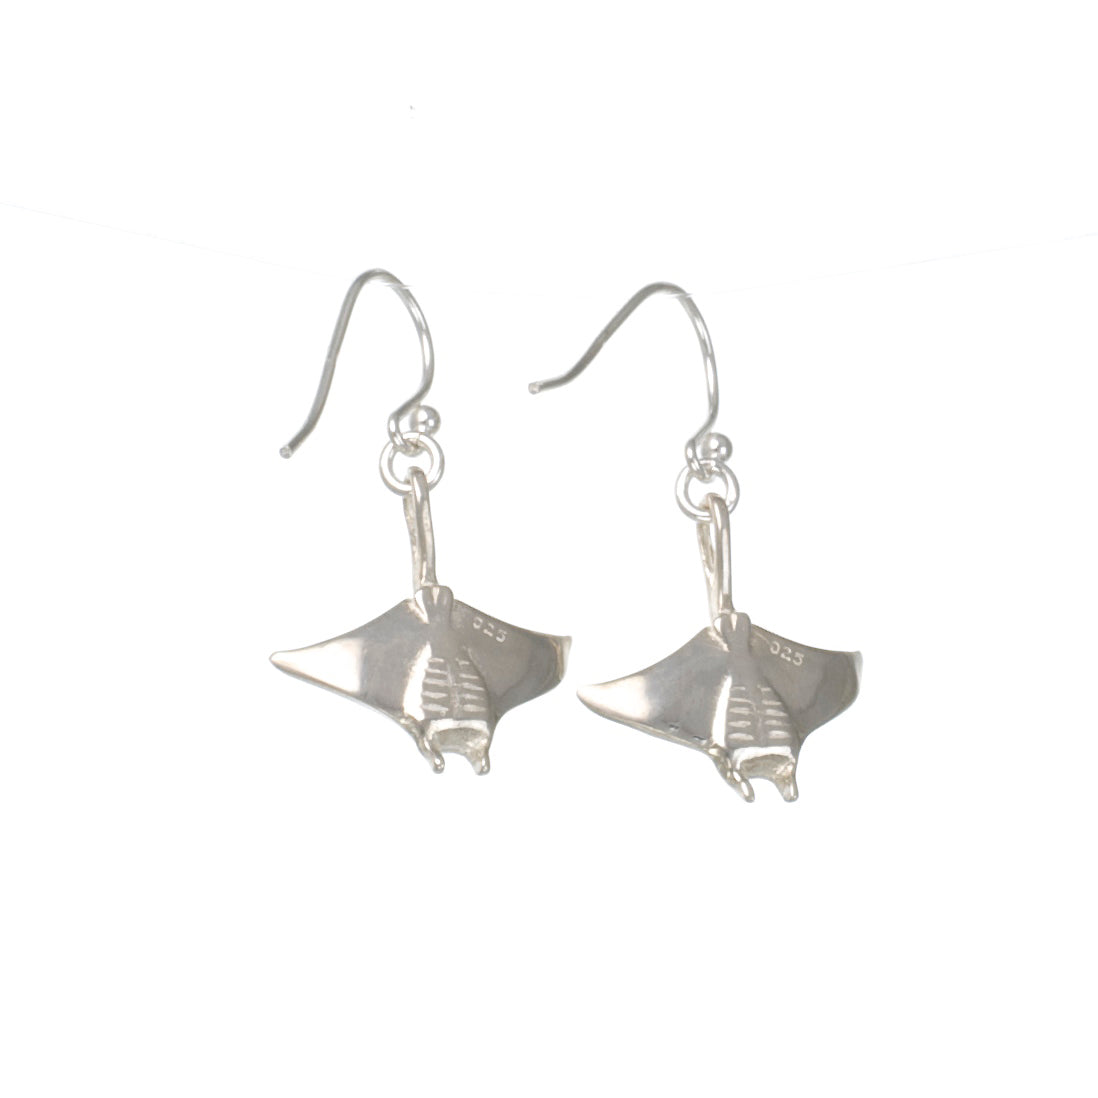 Stingray Earrings Sterling Silver- Manta Ray Sterling Silver Drop Earrings, Manta Ray Earrings, Stingray Charm, Sea Life Sterling Silver Drop Earrings - The Tool Store